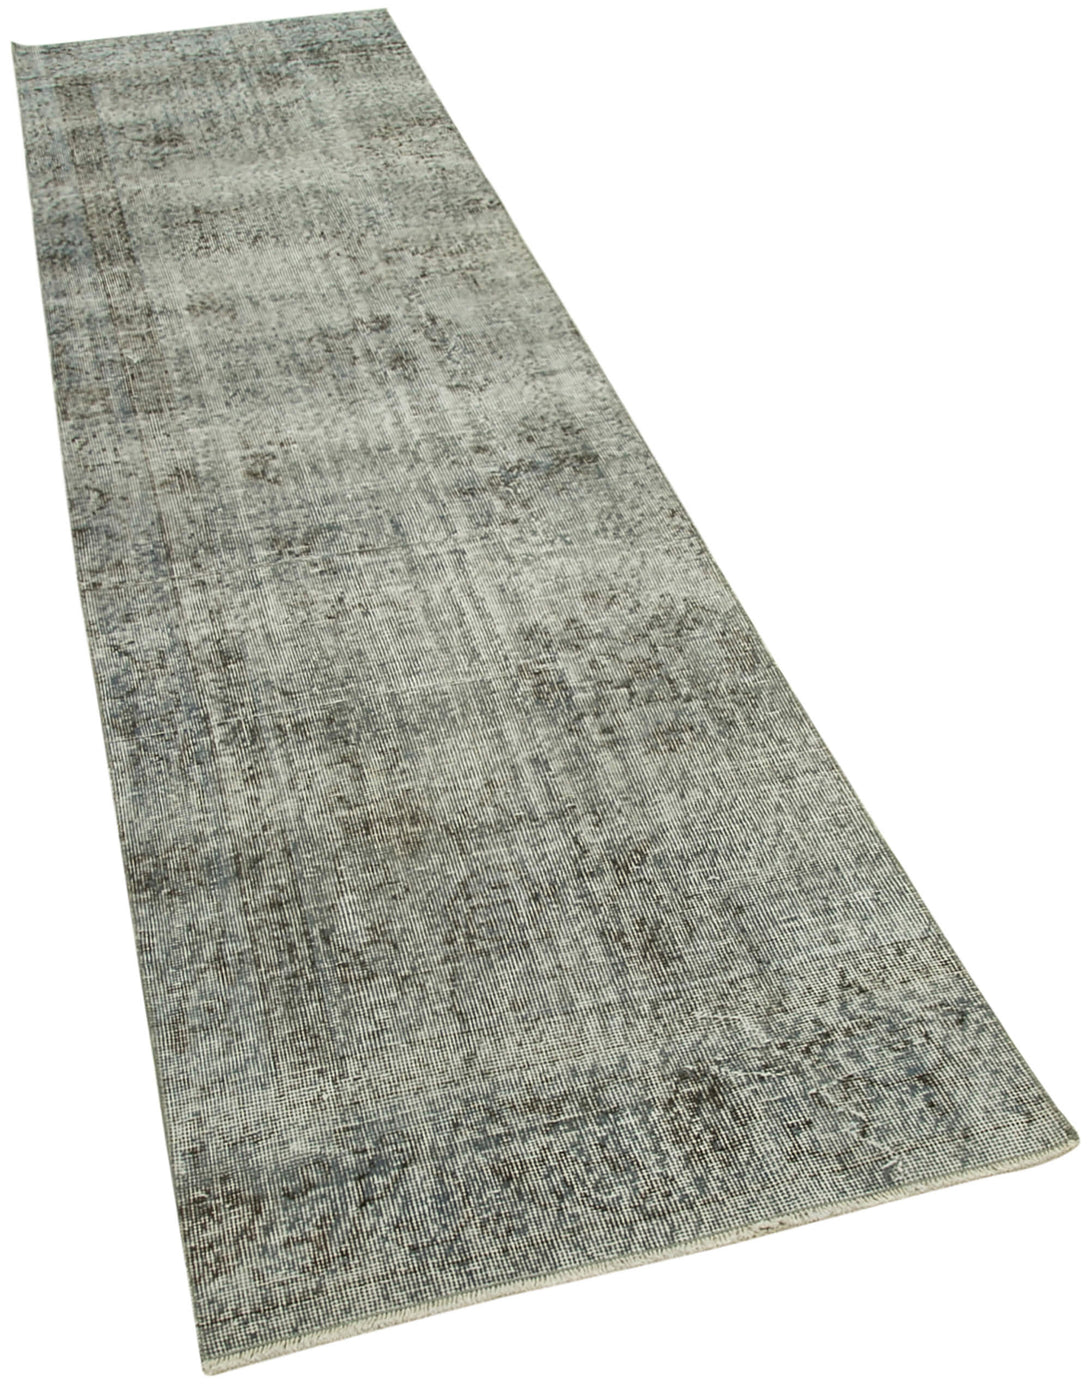 Handmade Overdyed Runner > Design# OL-AC-38122 > Size: 2'-7" x 10'-7", Carpet Culture Rugs, Handmade Rugs, NYC Rugs, New Rugs, Shop Rugs, Rug Store, Outlet Rugs, SoHo Rugs, Rugs in USA